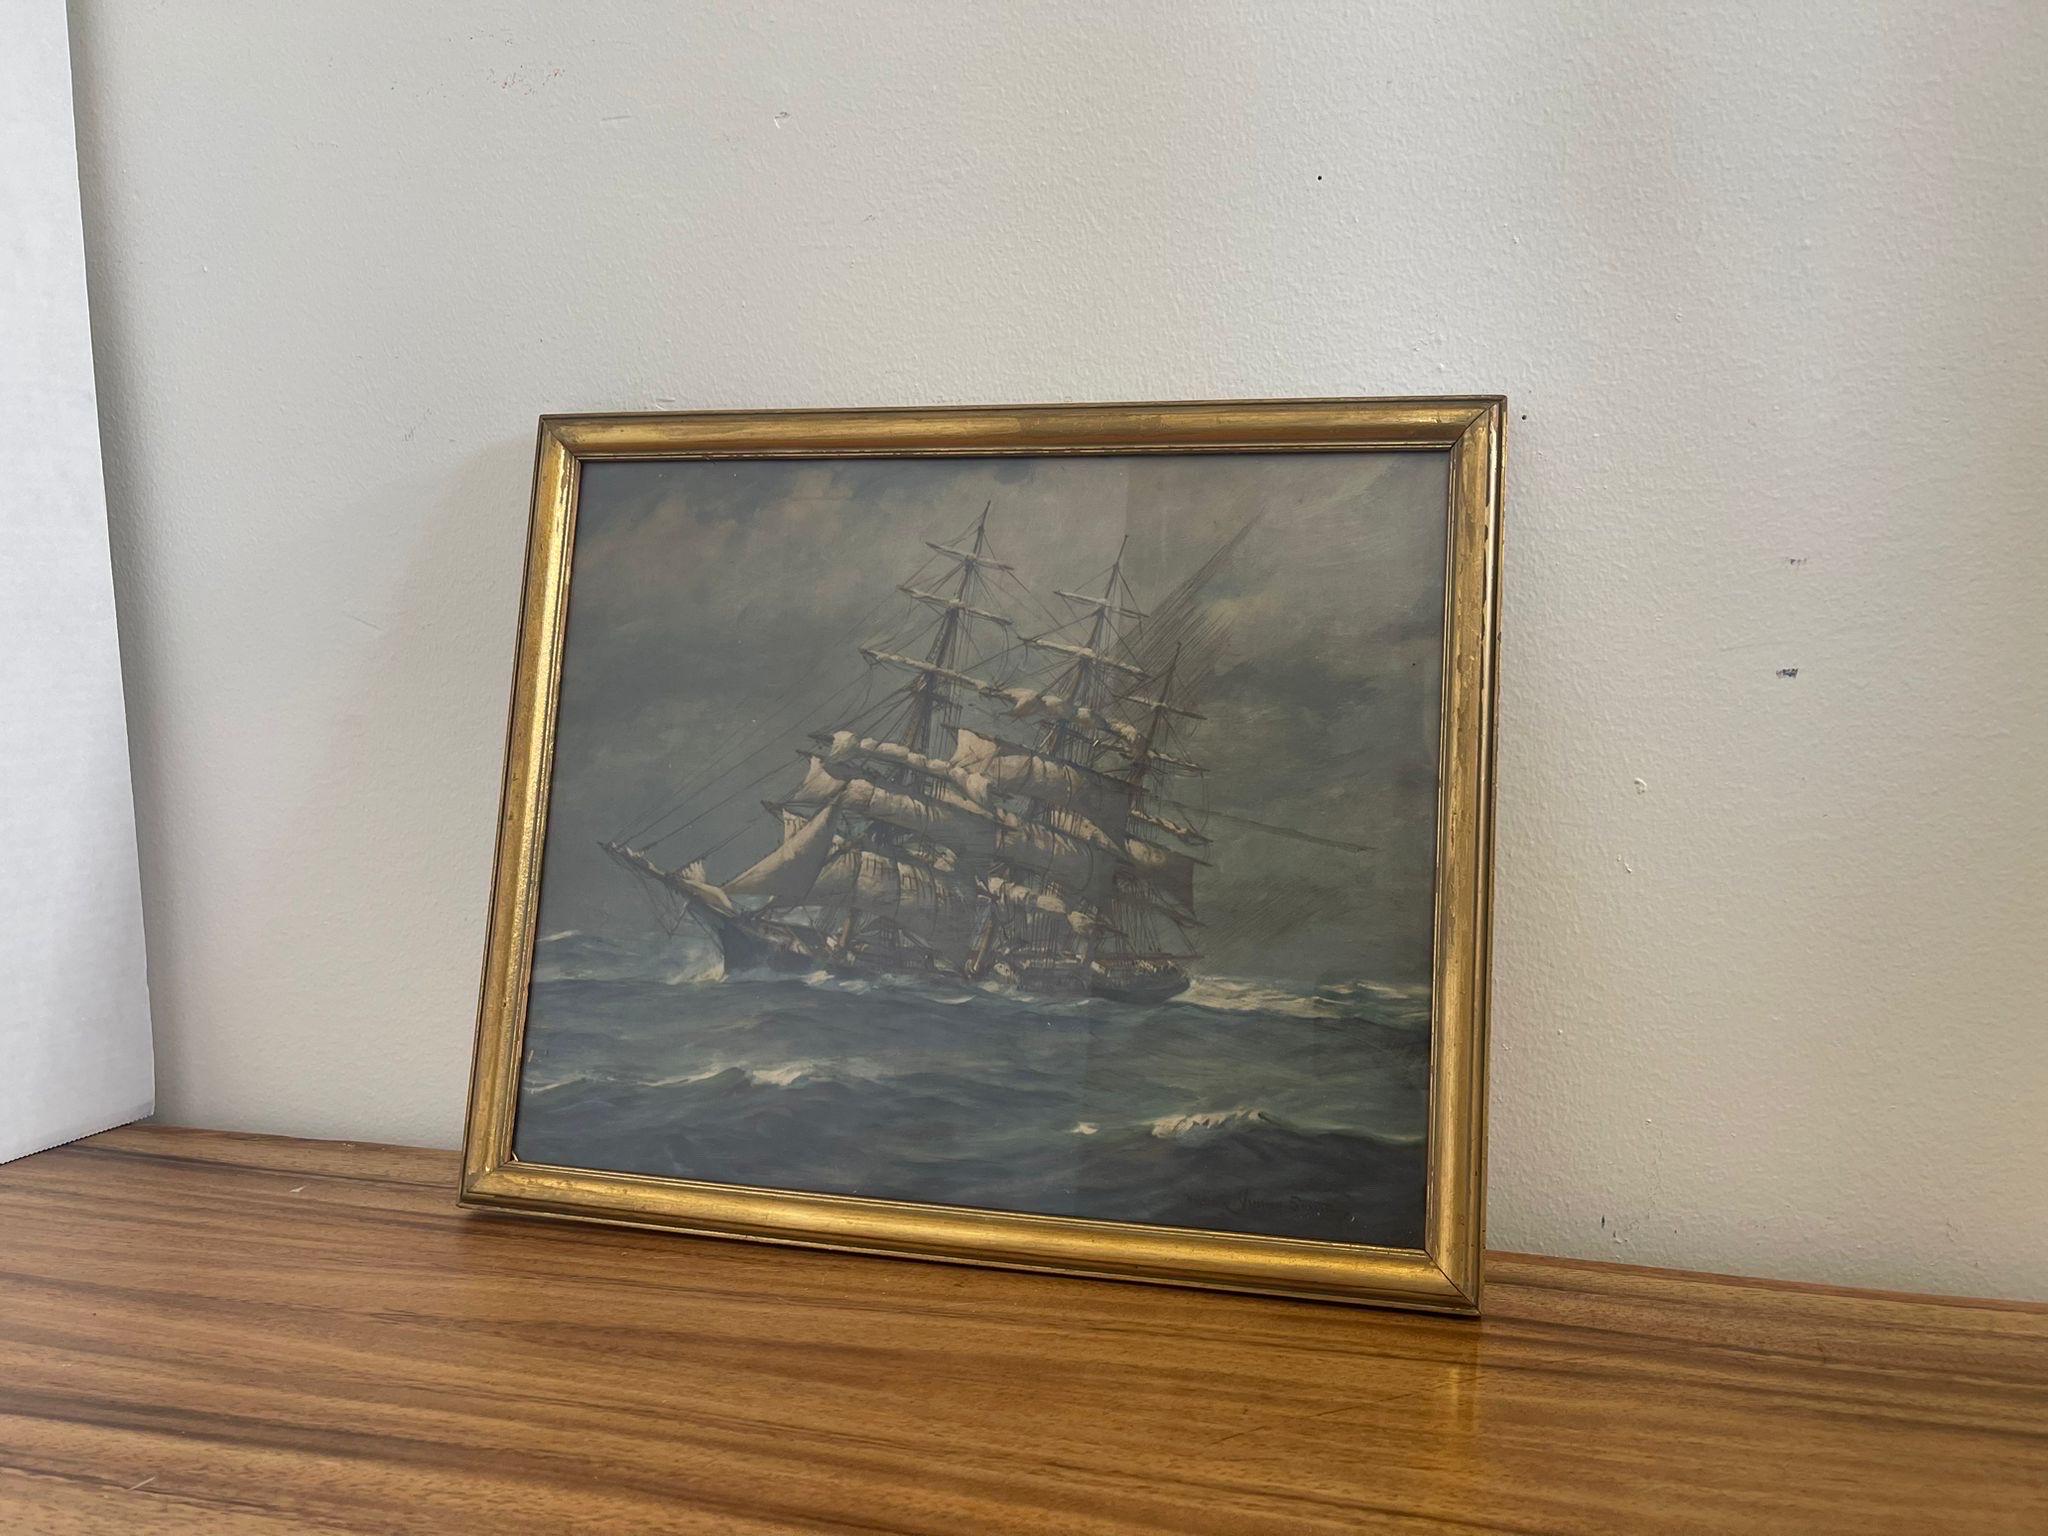 Print is within a gold toned wooden frame. Slight Patina. Artwork of sailboat going through the stormy weather. Vintage Condition Consistent with Age as Pictured.

Dimensions. 15 W ; 3/4 D ; 12 1/2 H